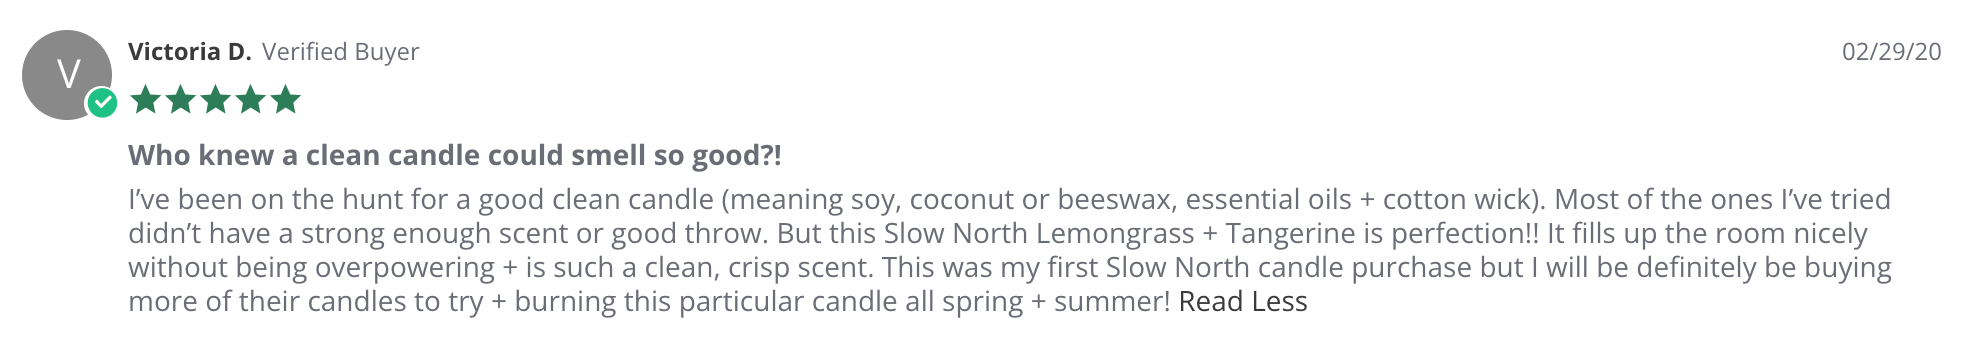 Review of Slow North's Non-Toxic Candles